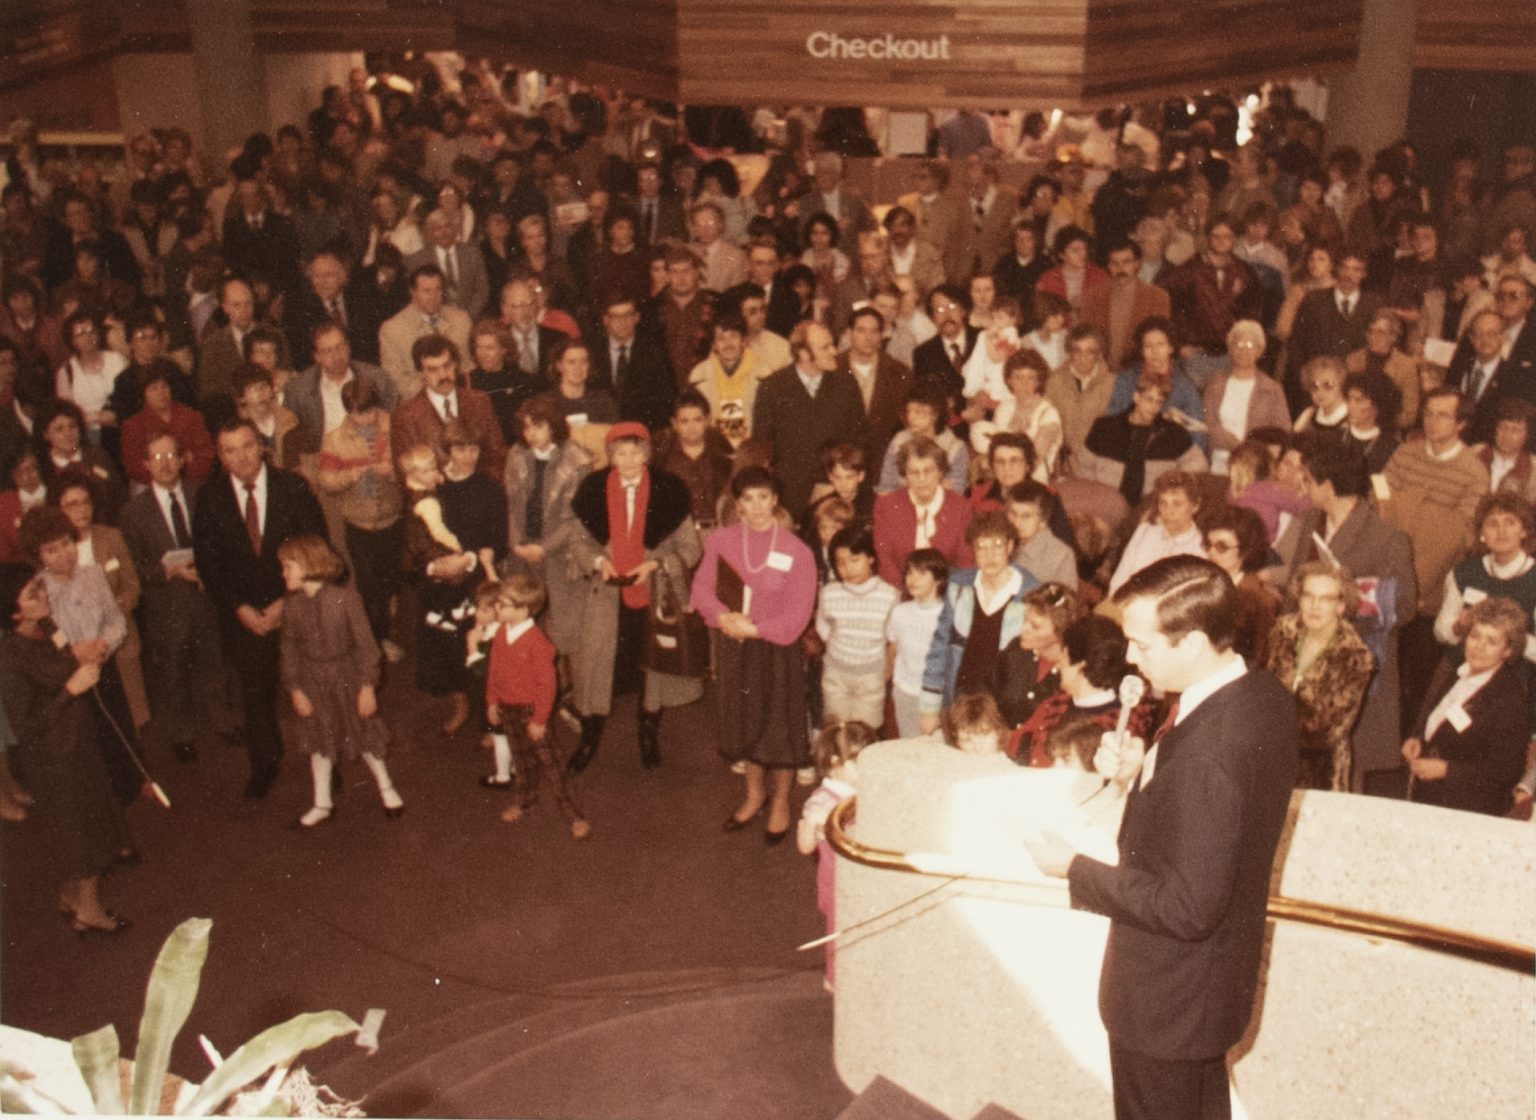 A man in a suit stands on a staircase and speaks while a crowd watches.